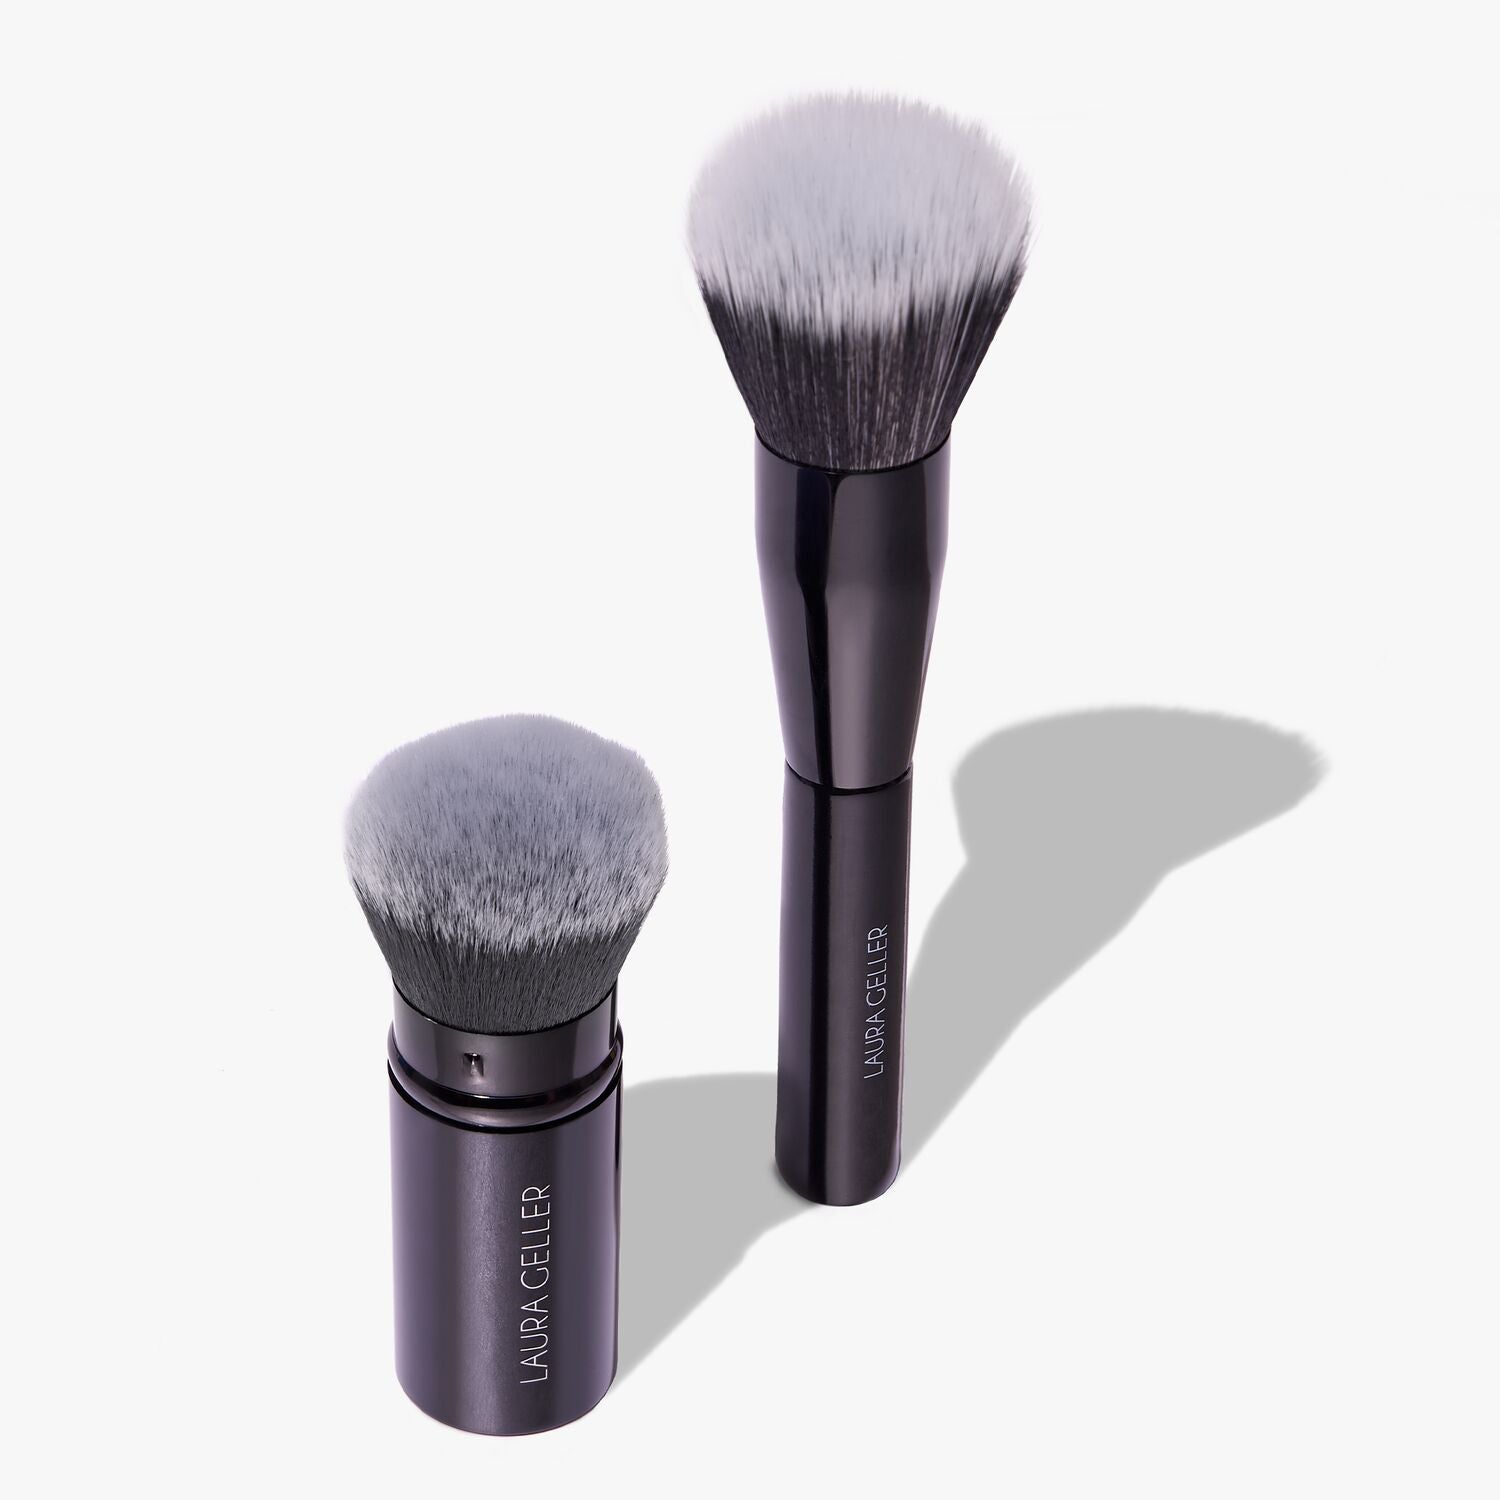 How to Clean Your Make-Up Brushes - Gimme Some Oven